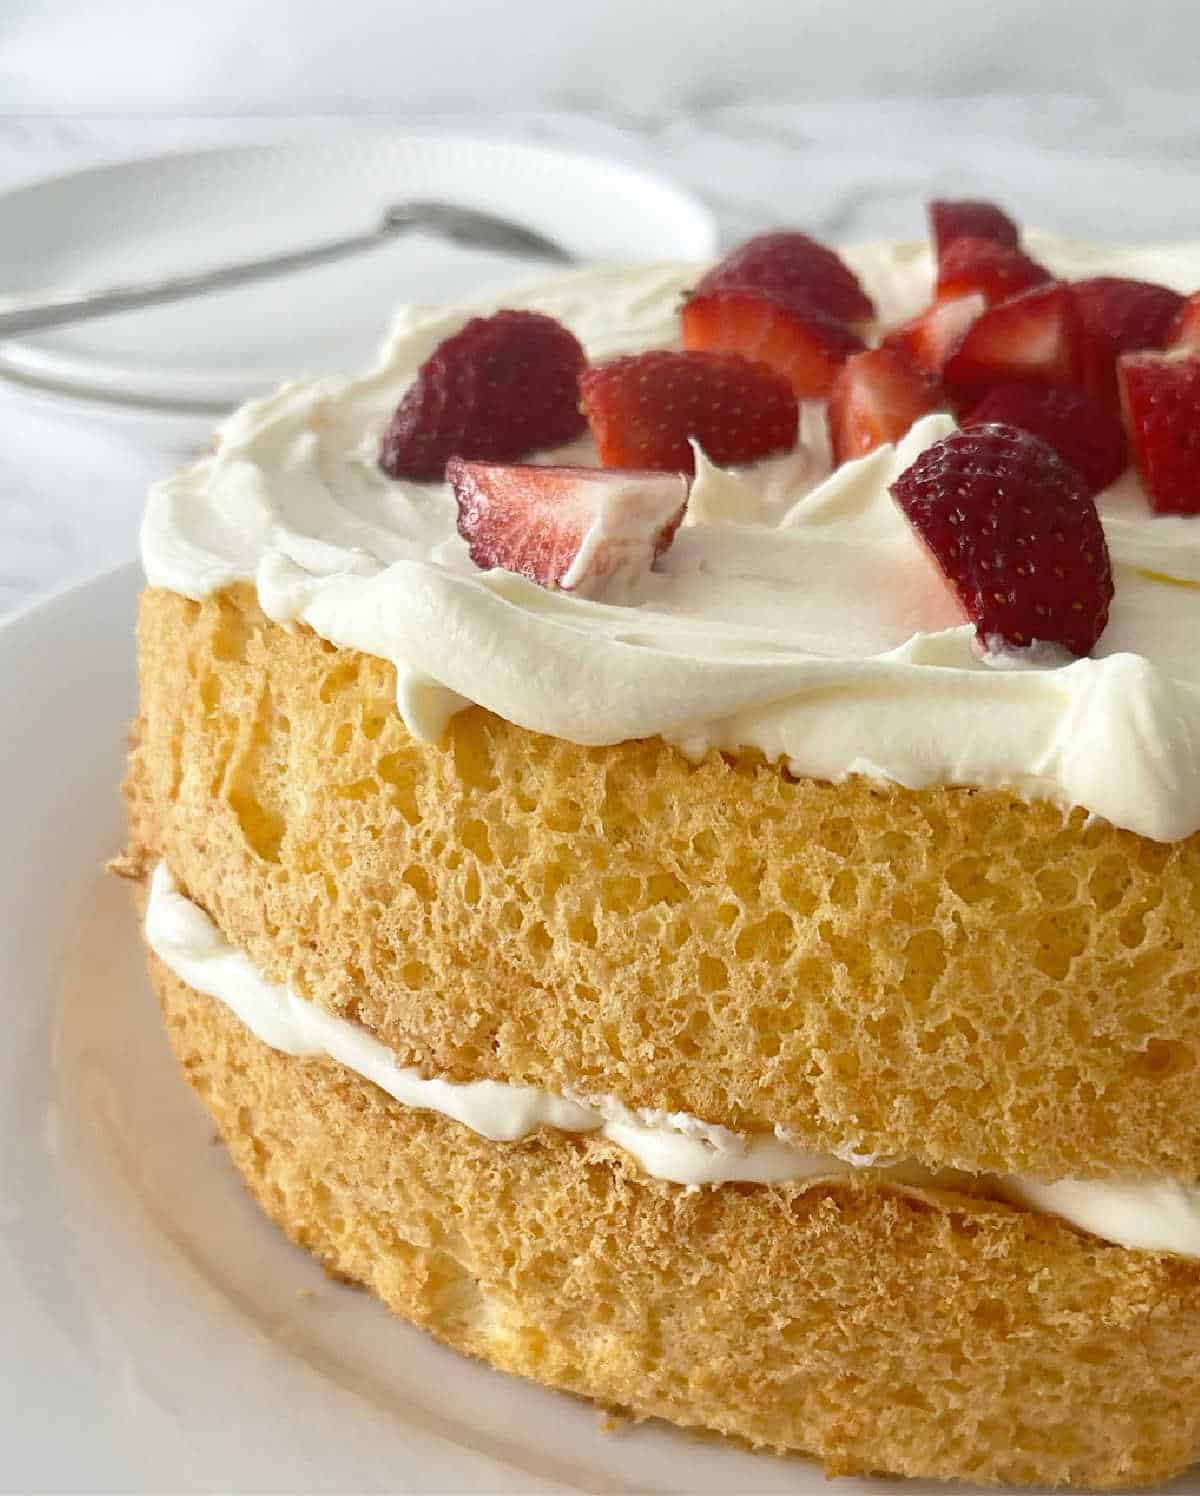 Jam and Cream Sponge on a white plate.